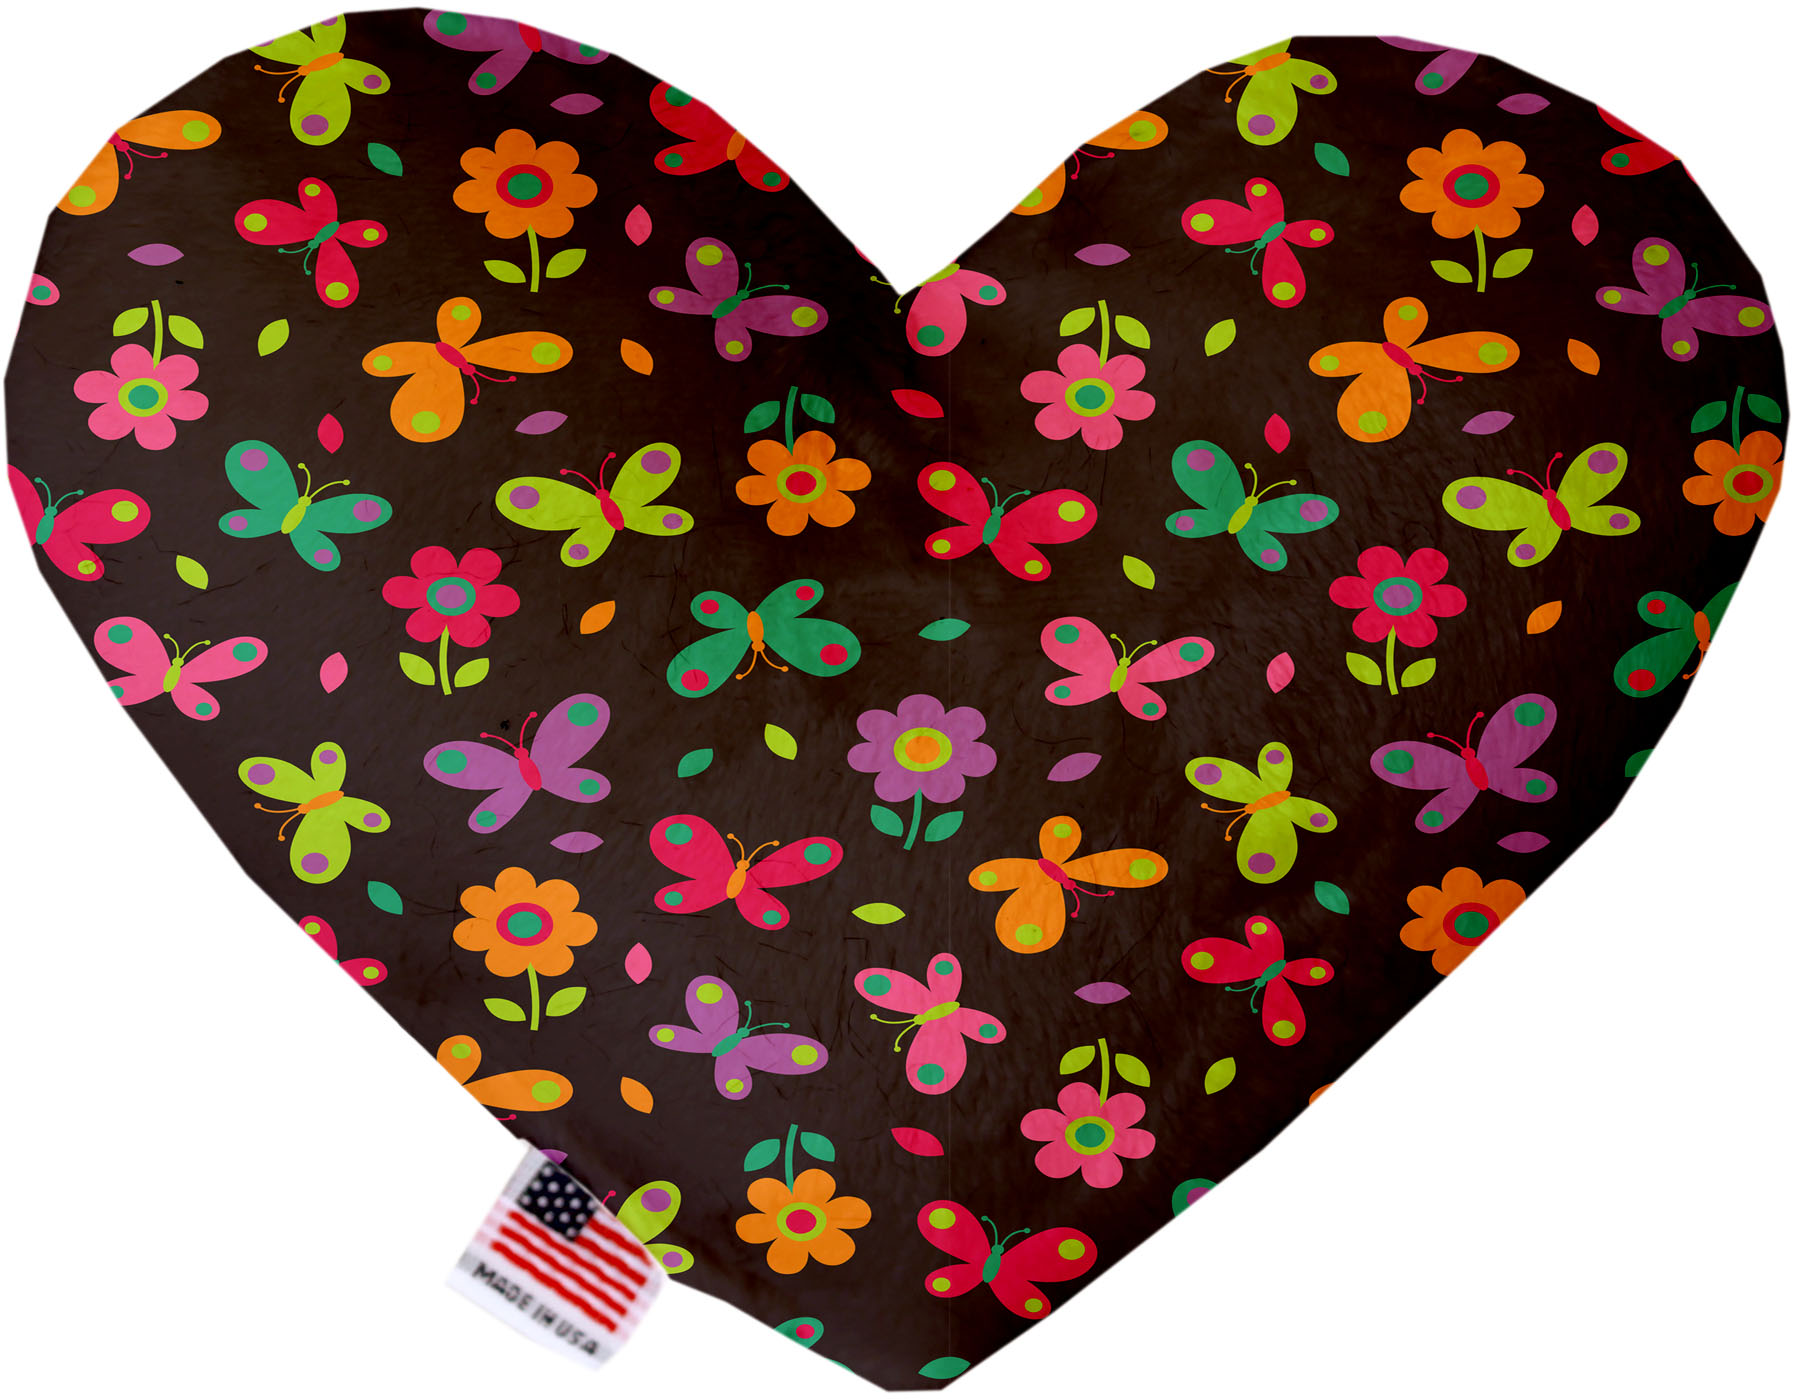 Butterflies in Brown 6 inch Canvas Heart Dog Toy